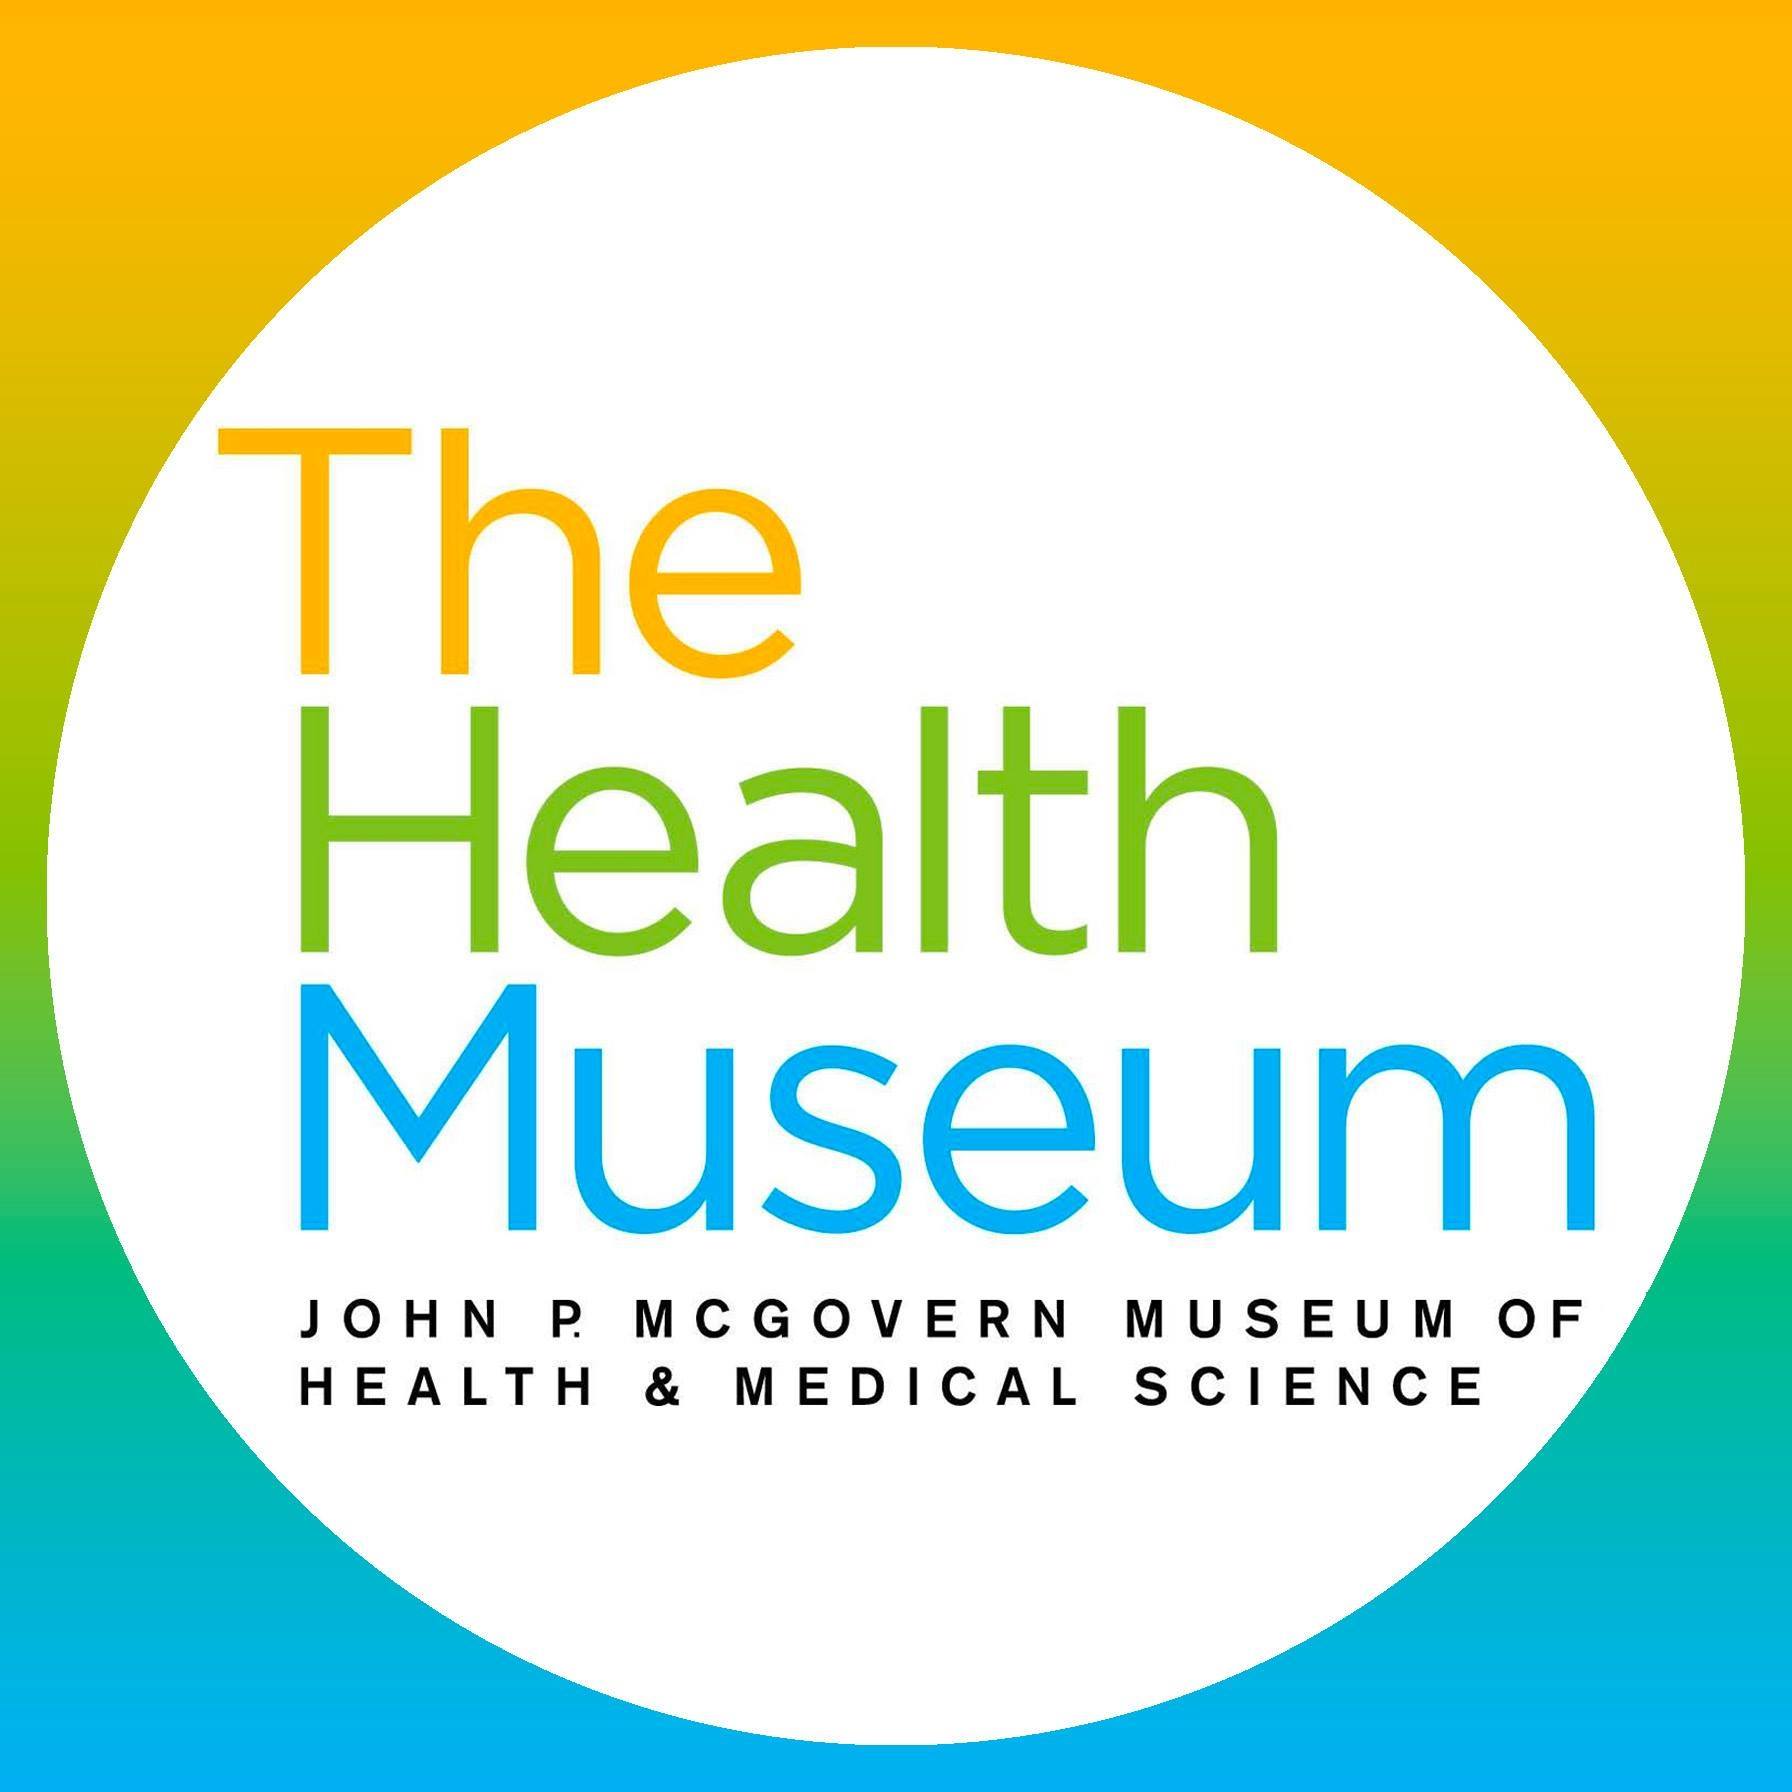 The Health Museum|Museums|Travel